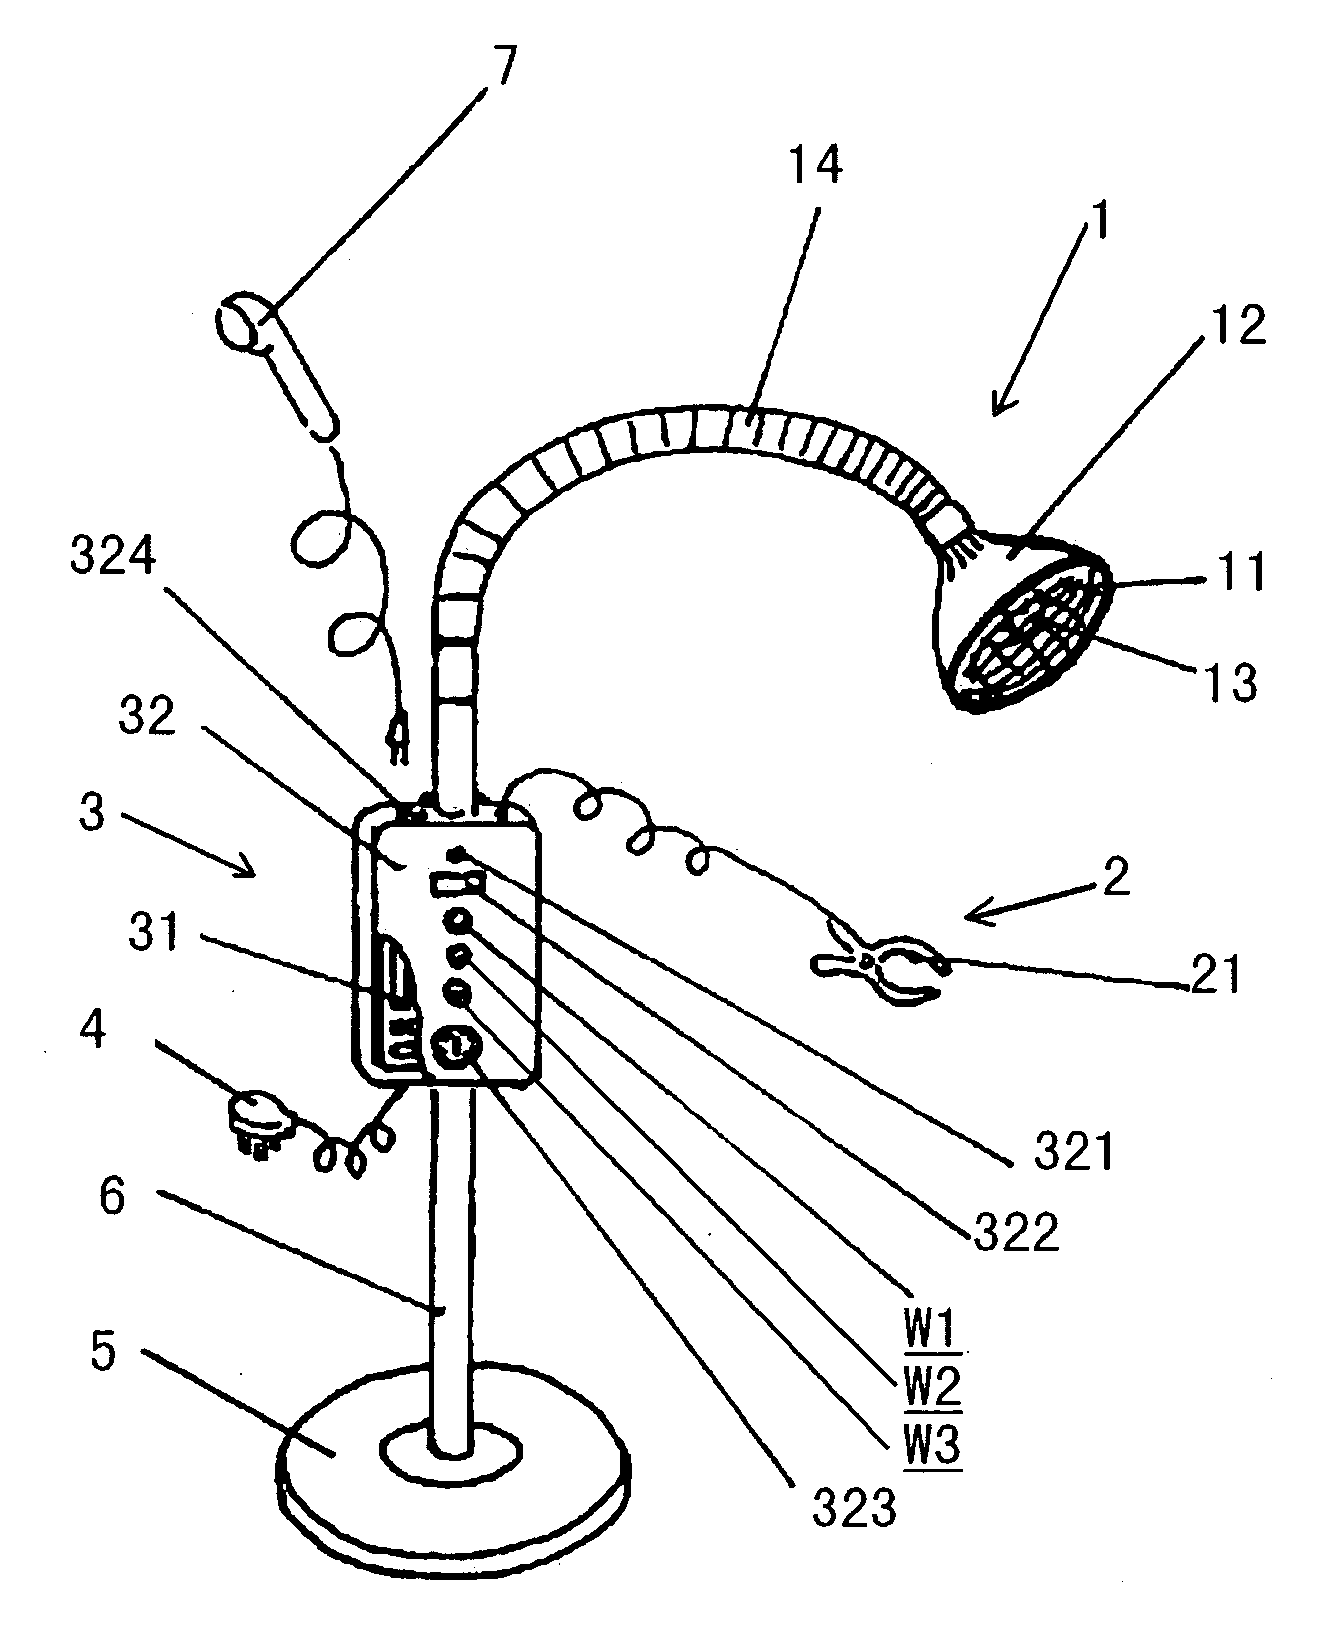 Hypertension therapy instrument and method for treating hypertension